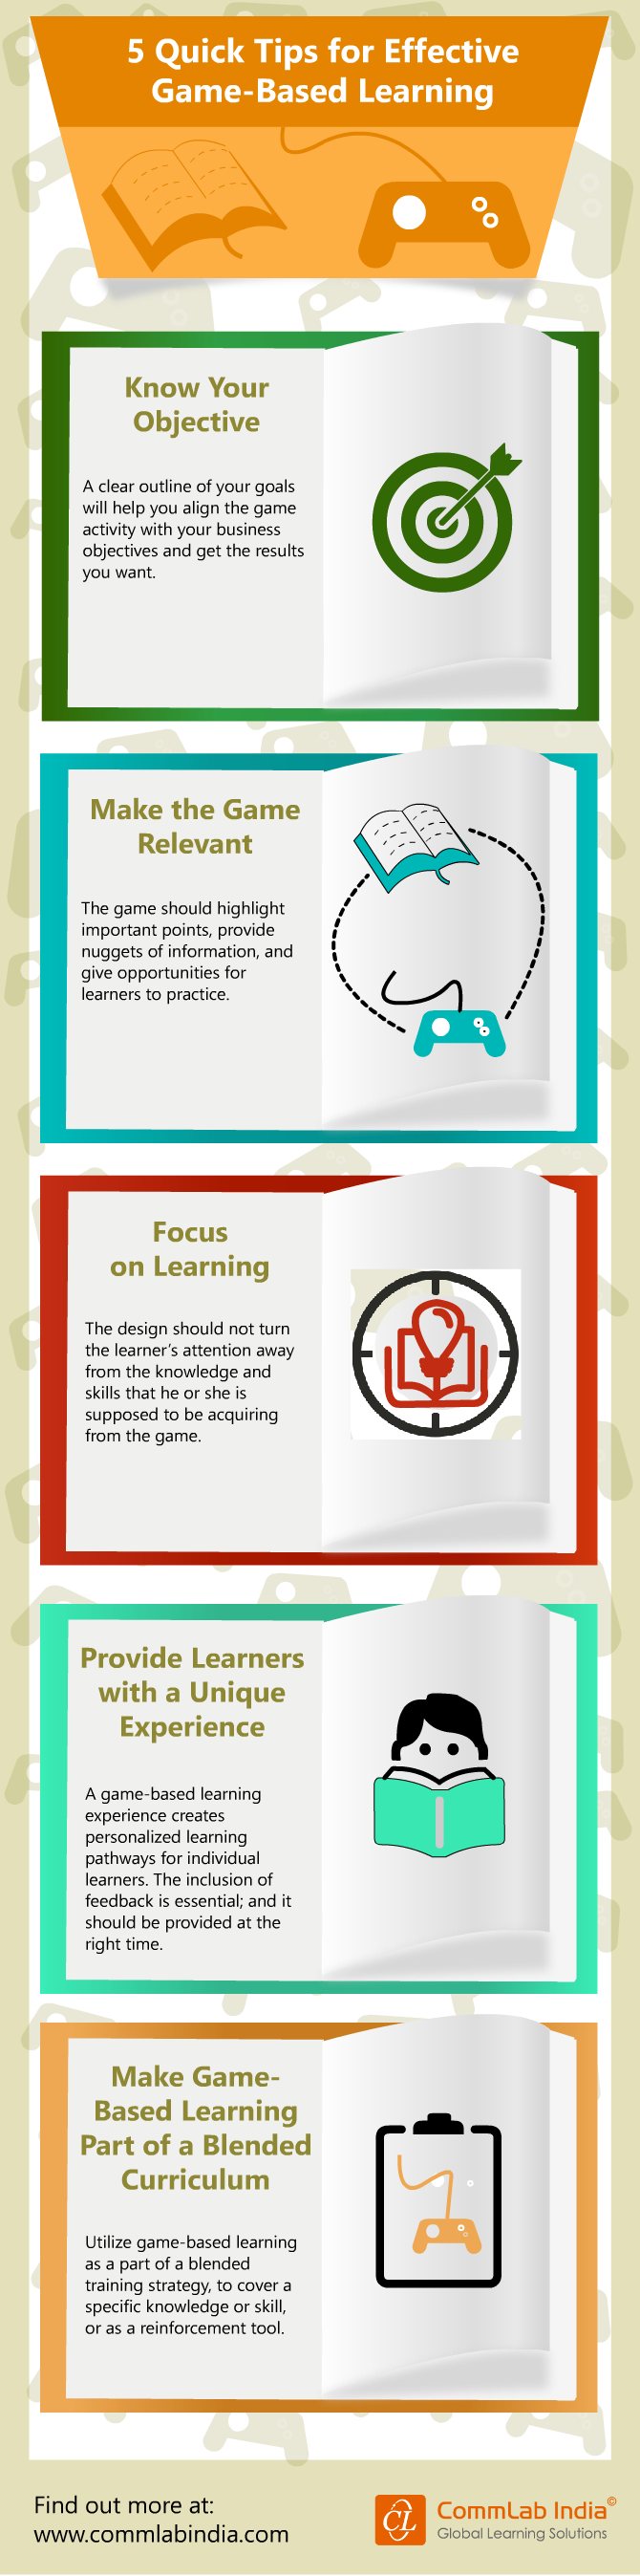 5 Quick Tips for Effective Game-Based Learning [Infographic]